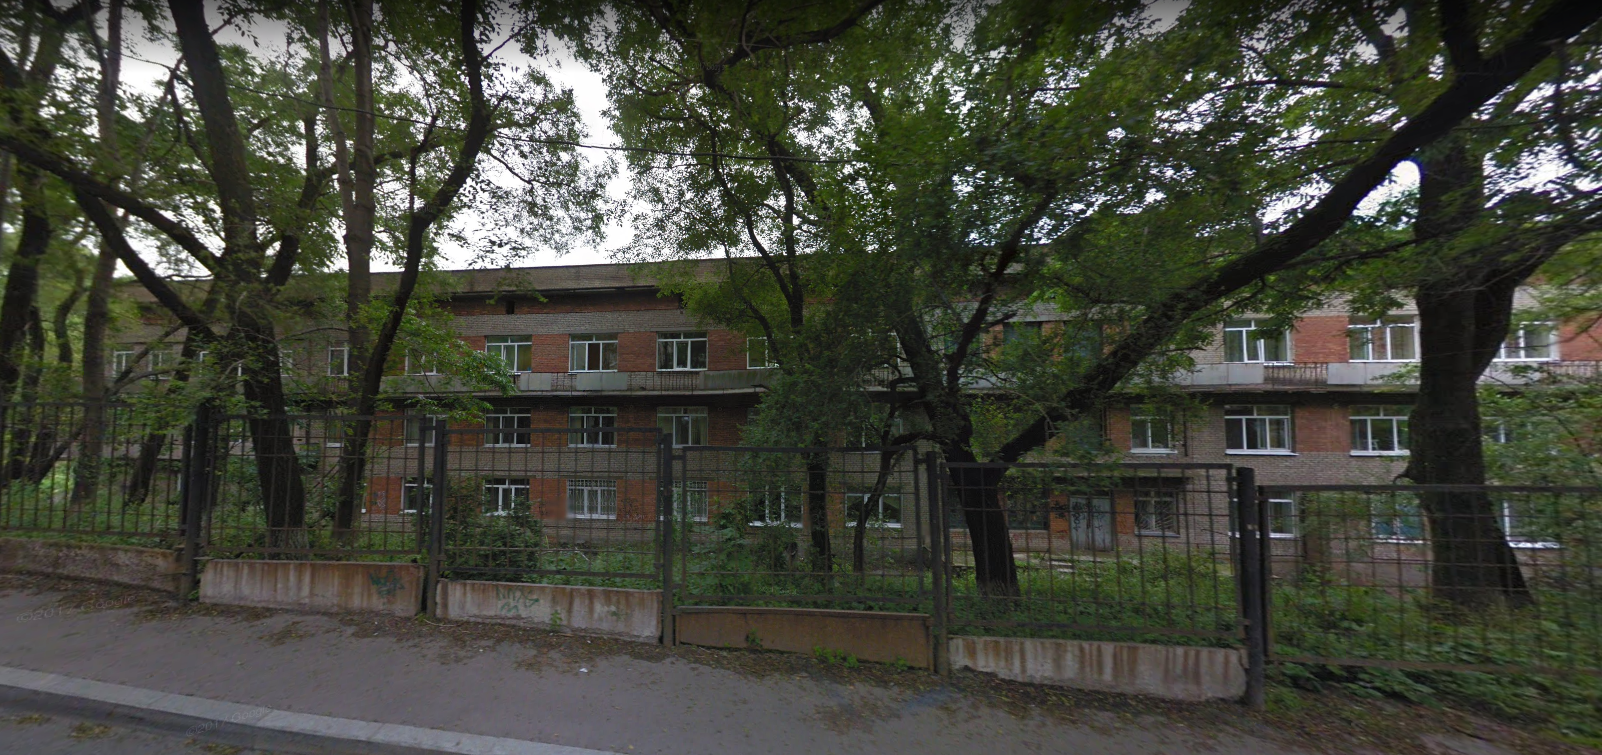 This is a view of the wing of the hospital where Masha was treated. Note the bars on some of the windows. This would have been scary for a young child with no supportive adult to explain her surroundings. The image is from a 2017 Google streetview photograph.